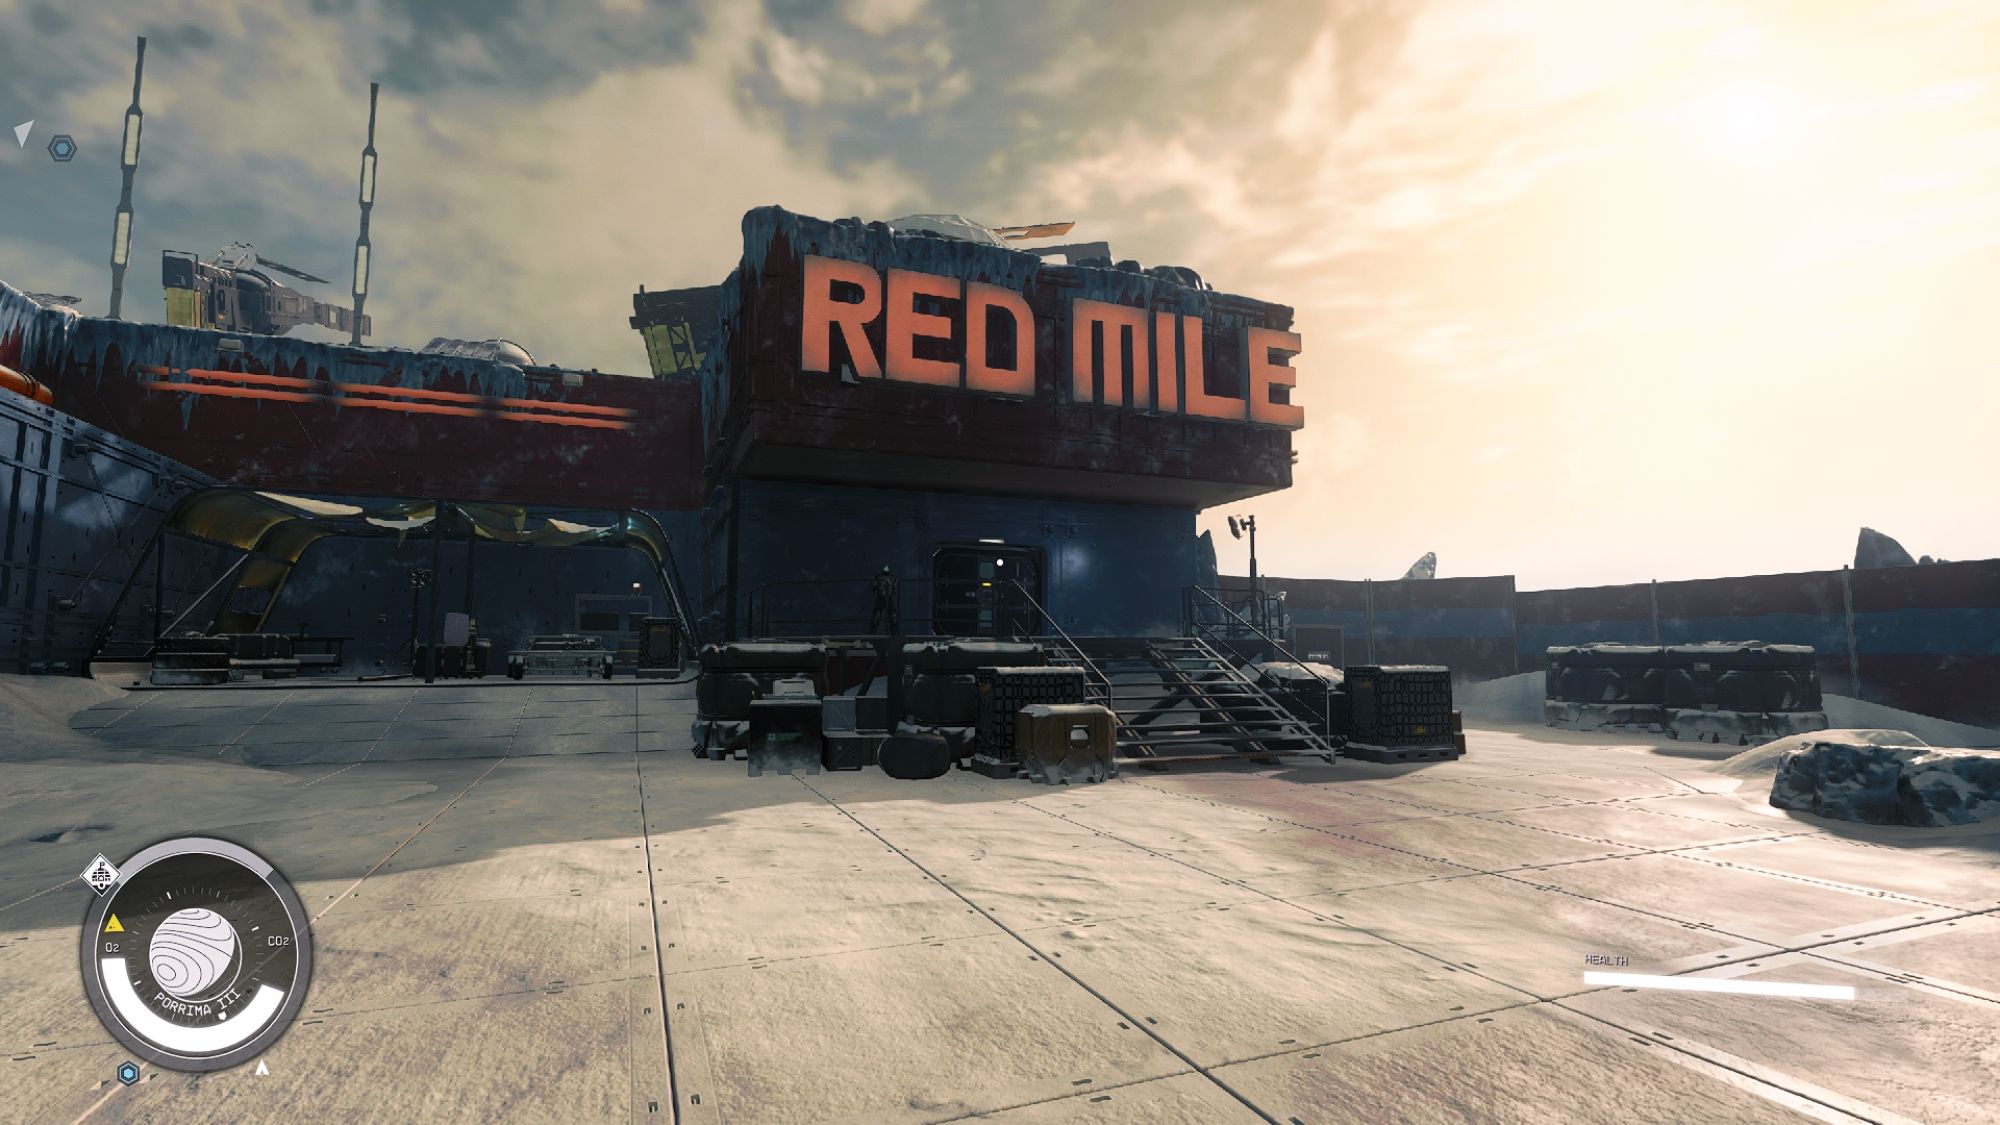 red mile in starfield